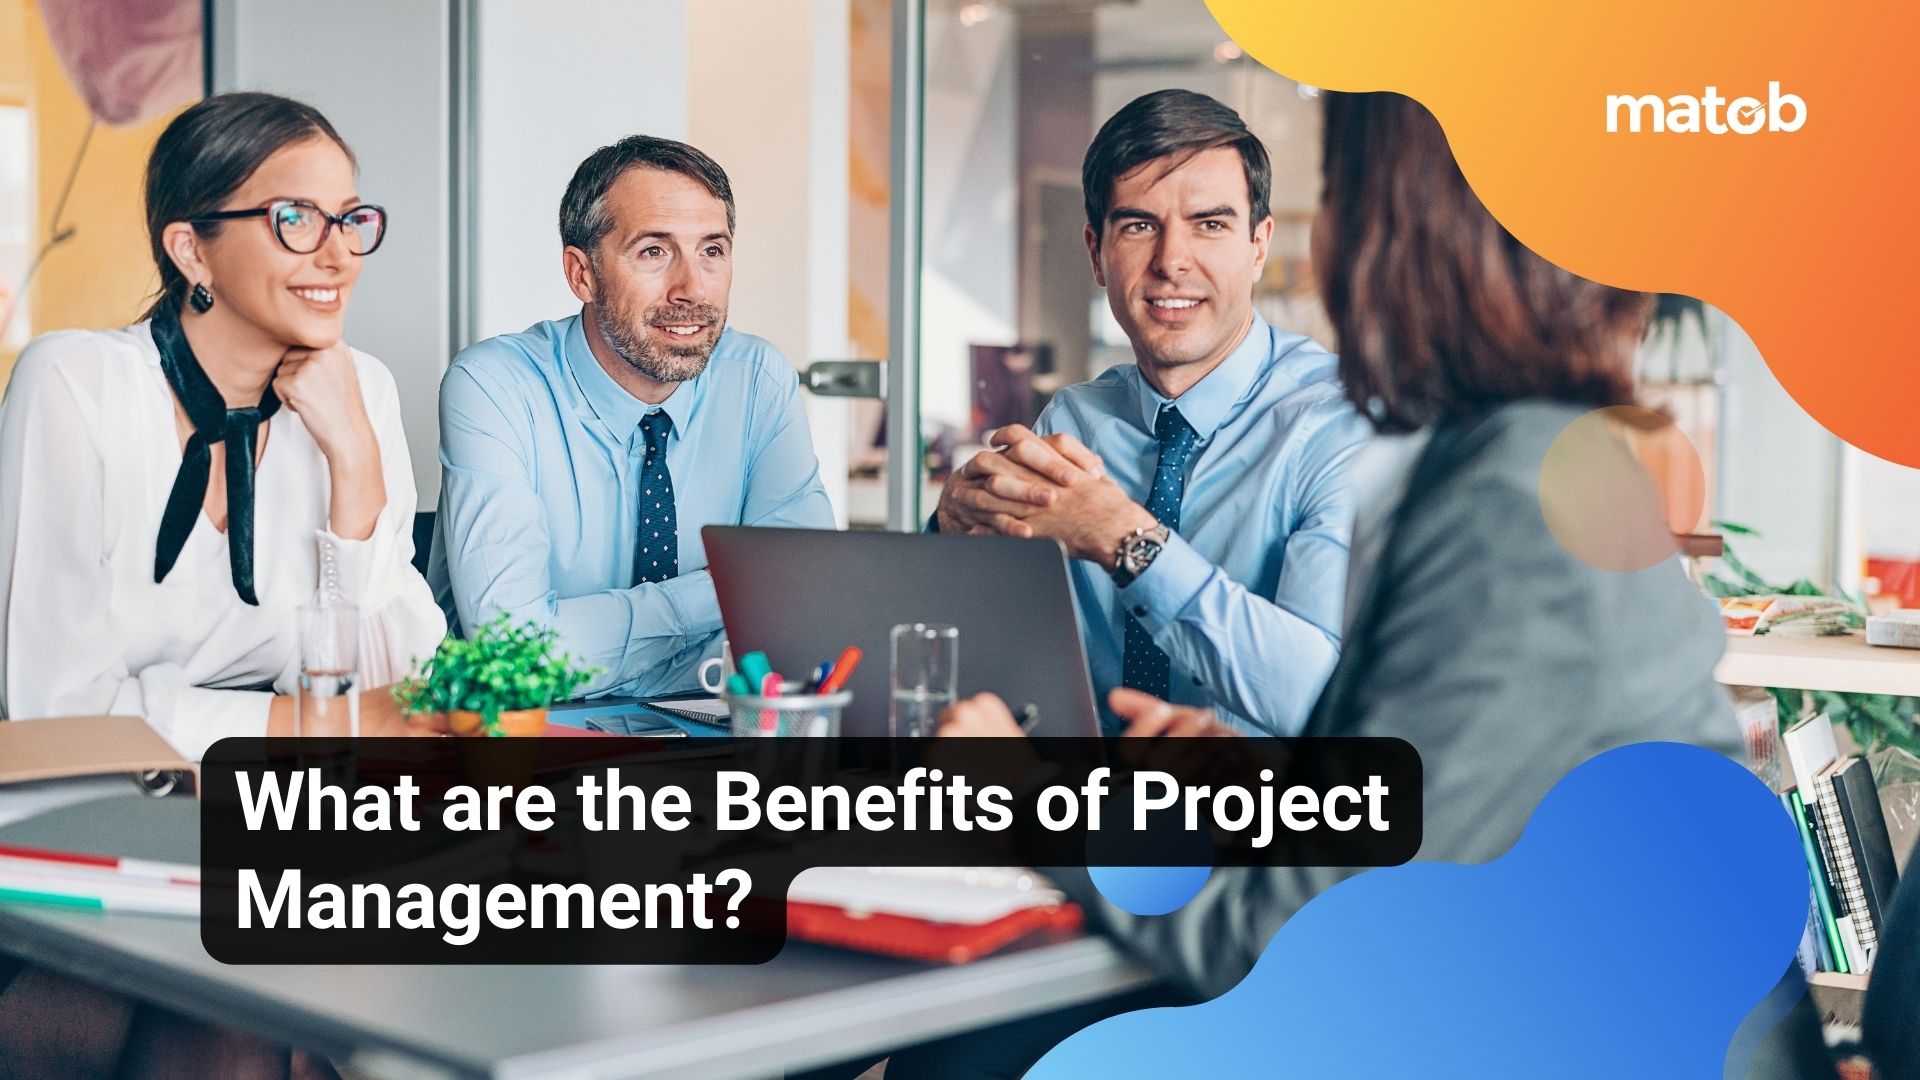 What are the Benefits of Project Management?